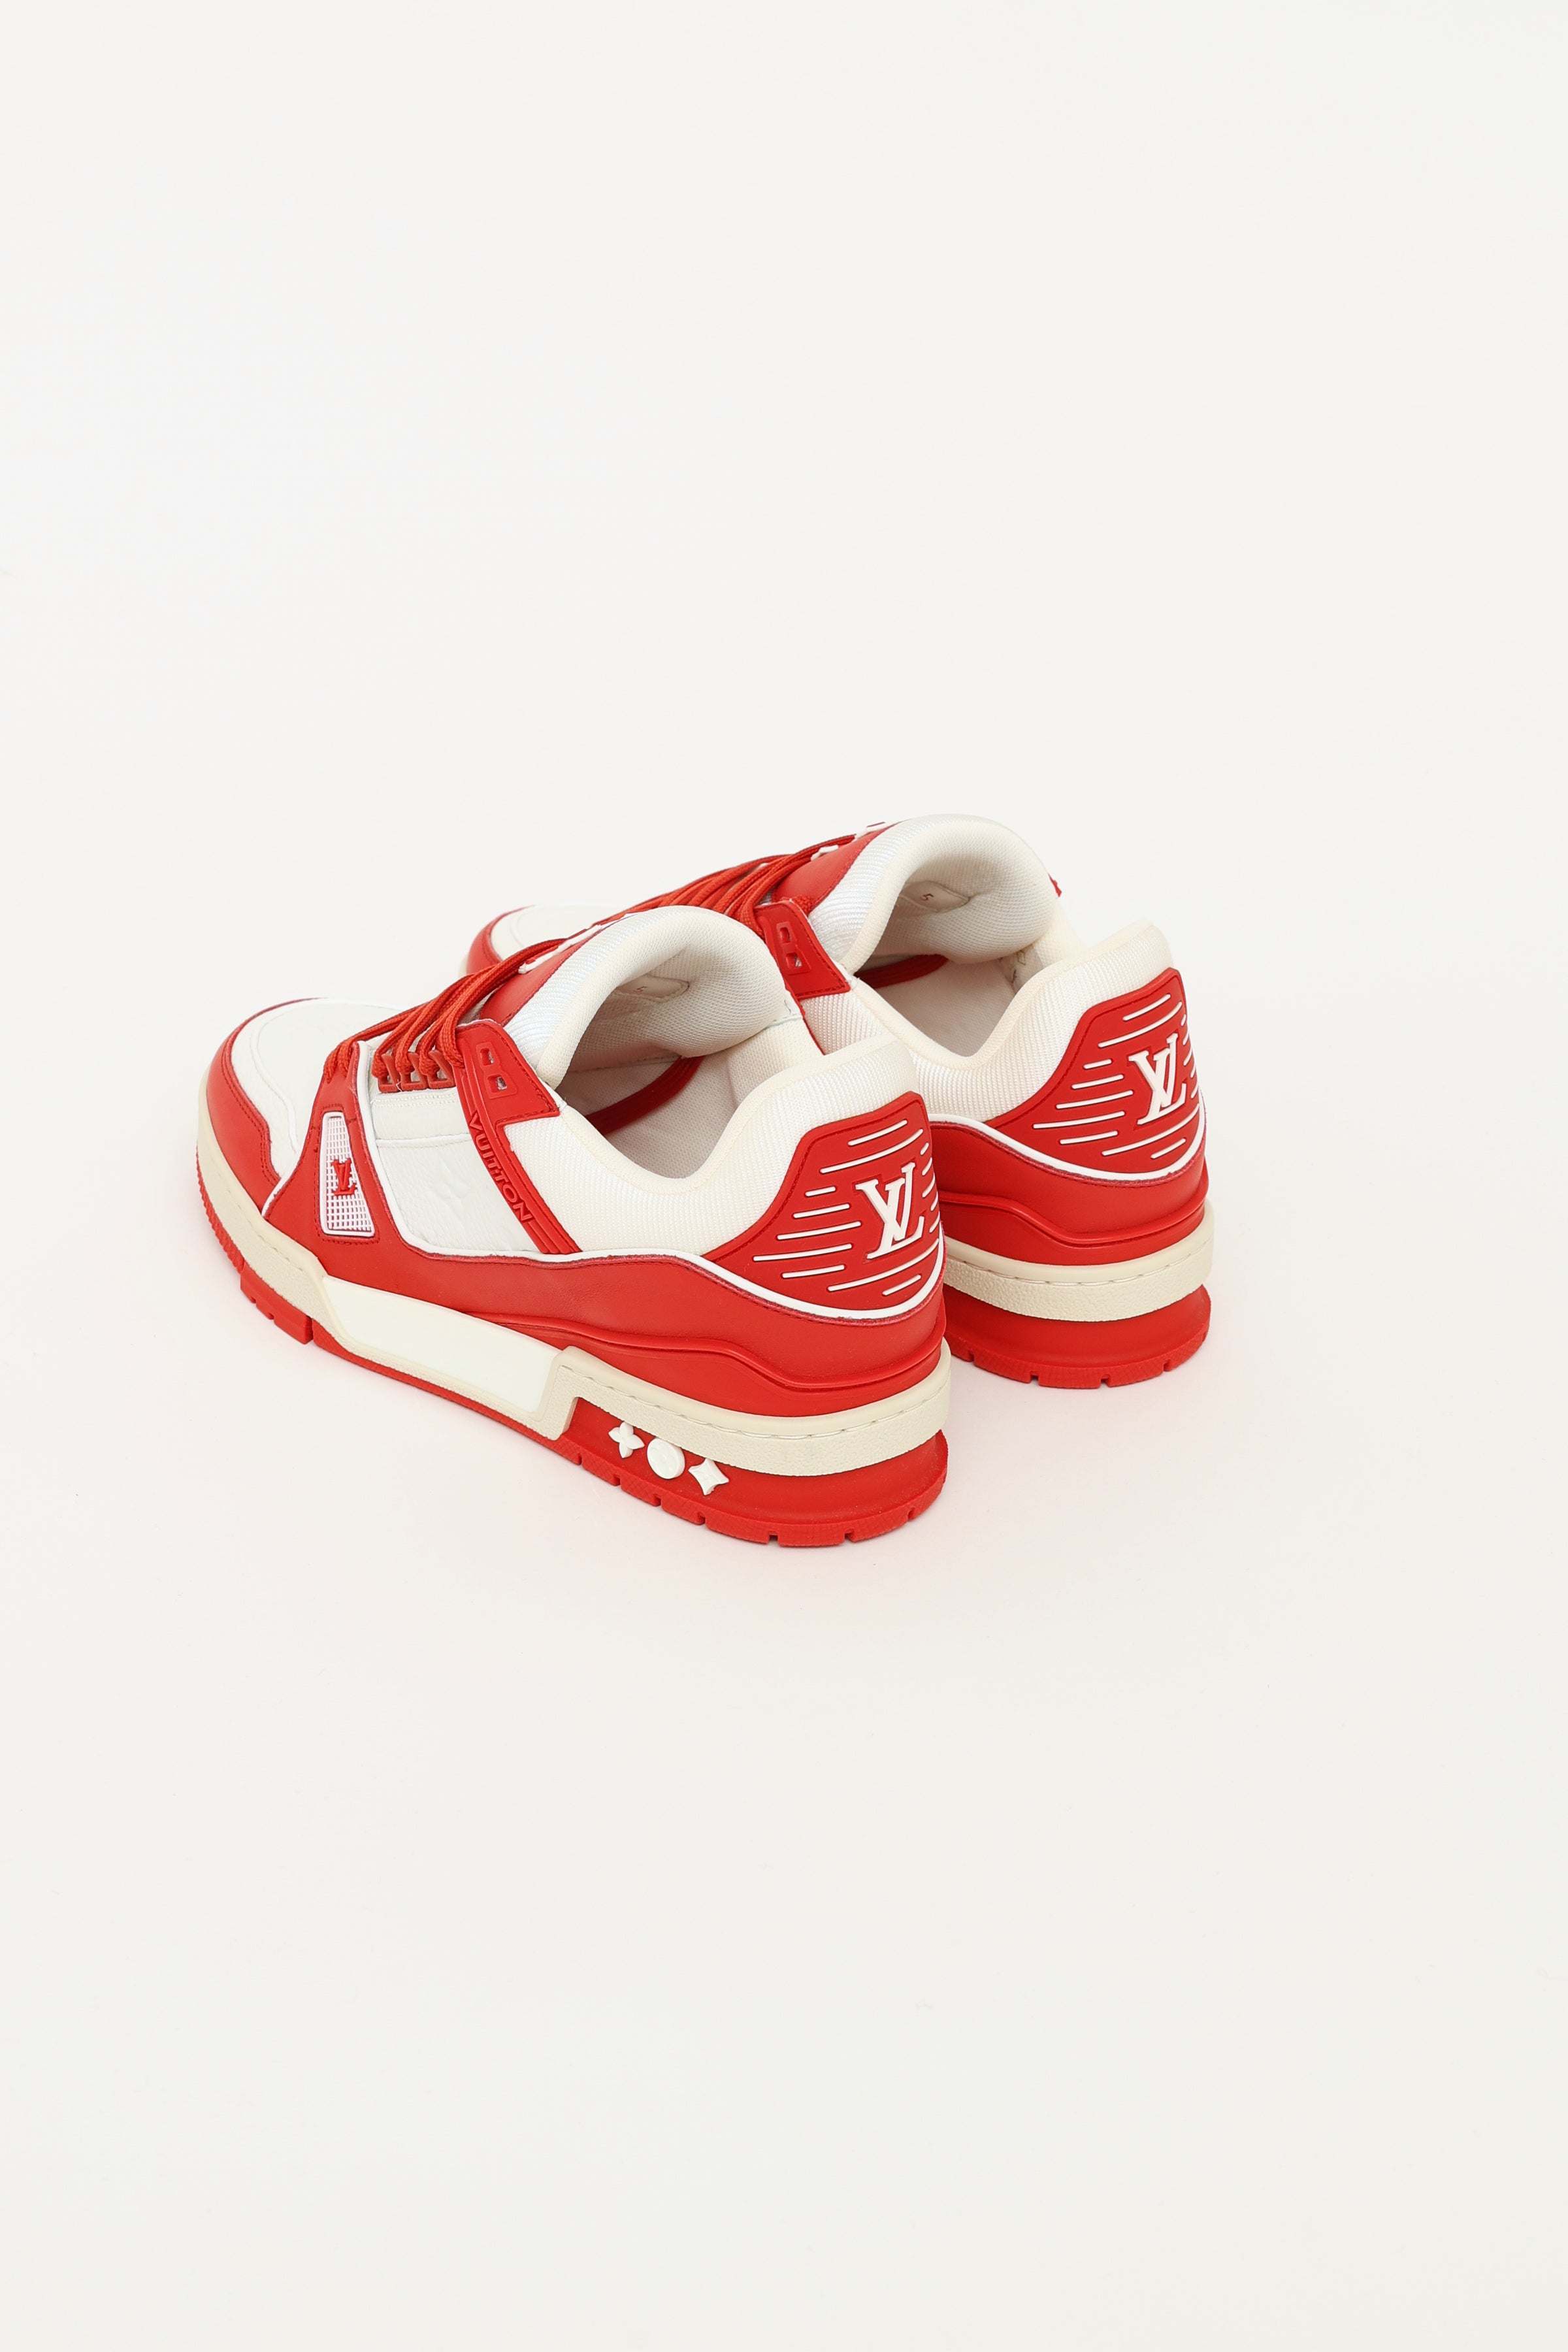 Buy Product (RED) x Louis Vuitton Trainer 'Red' - 1A8PJW